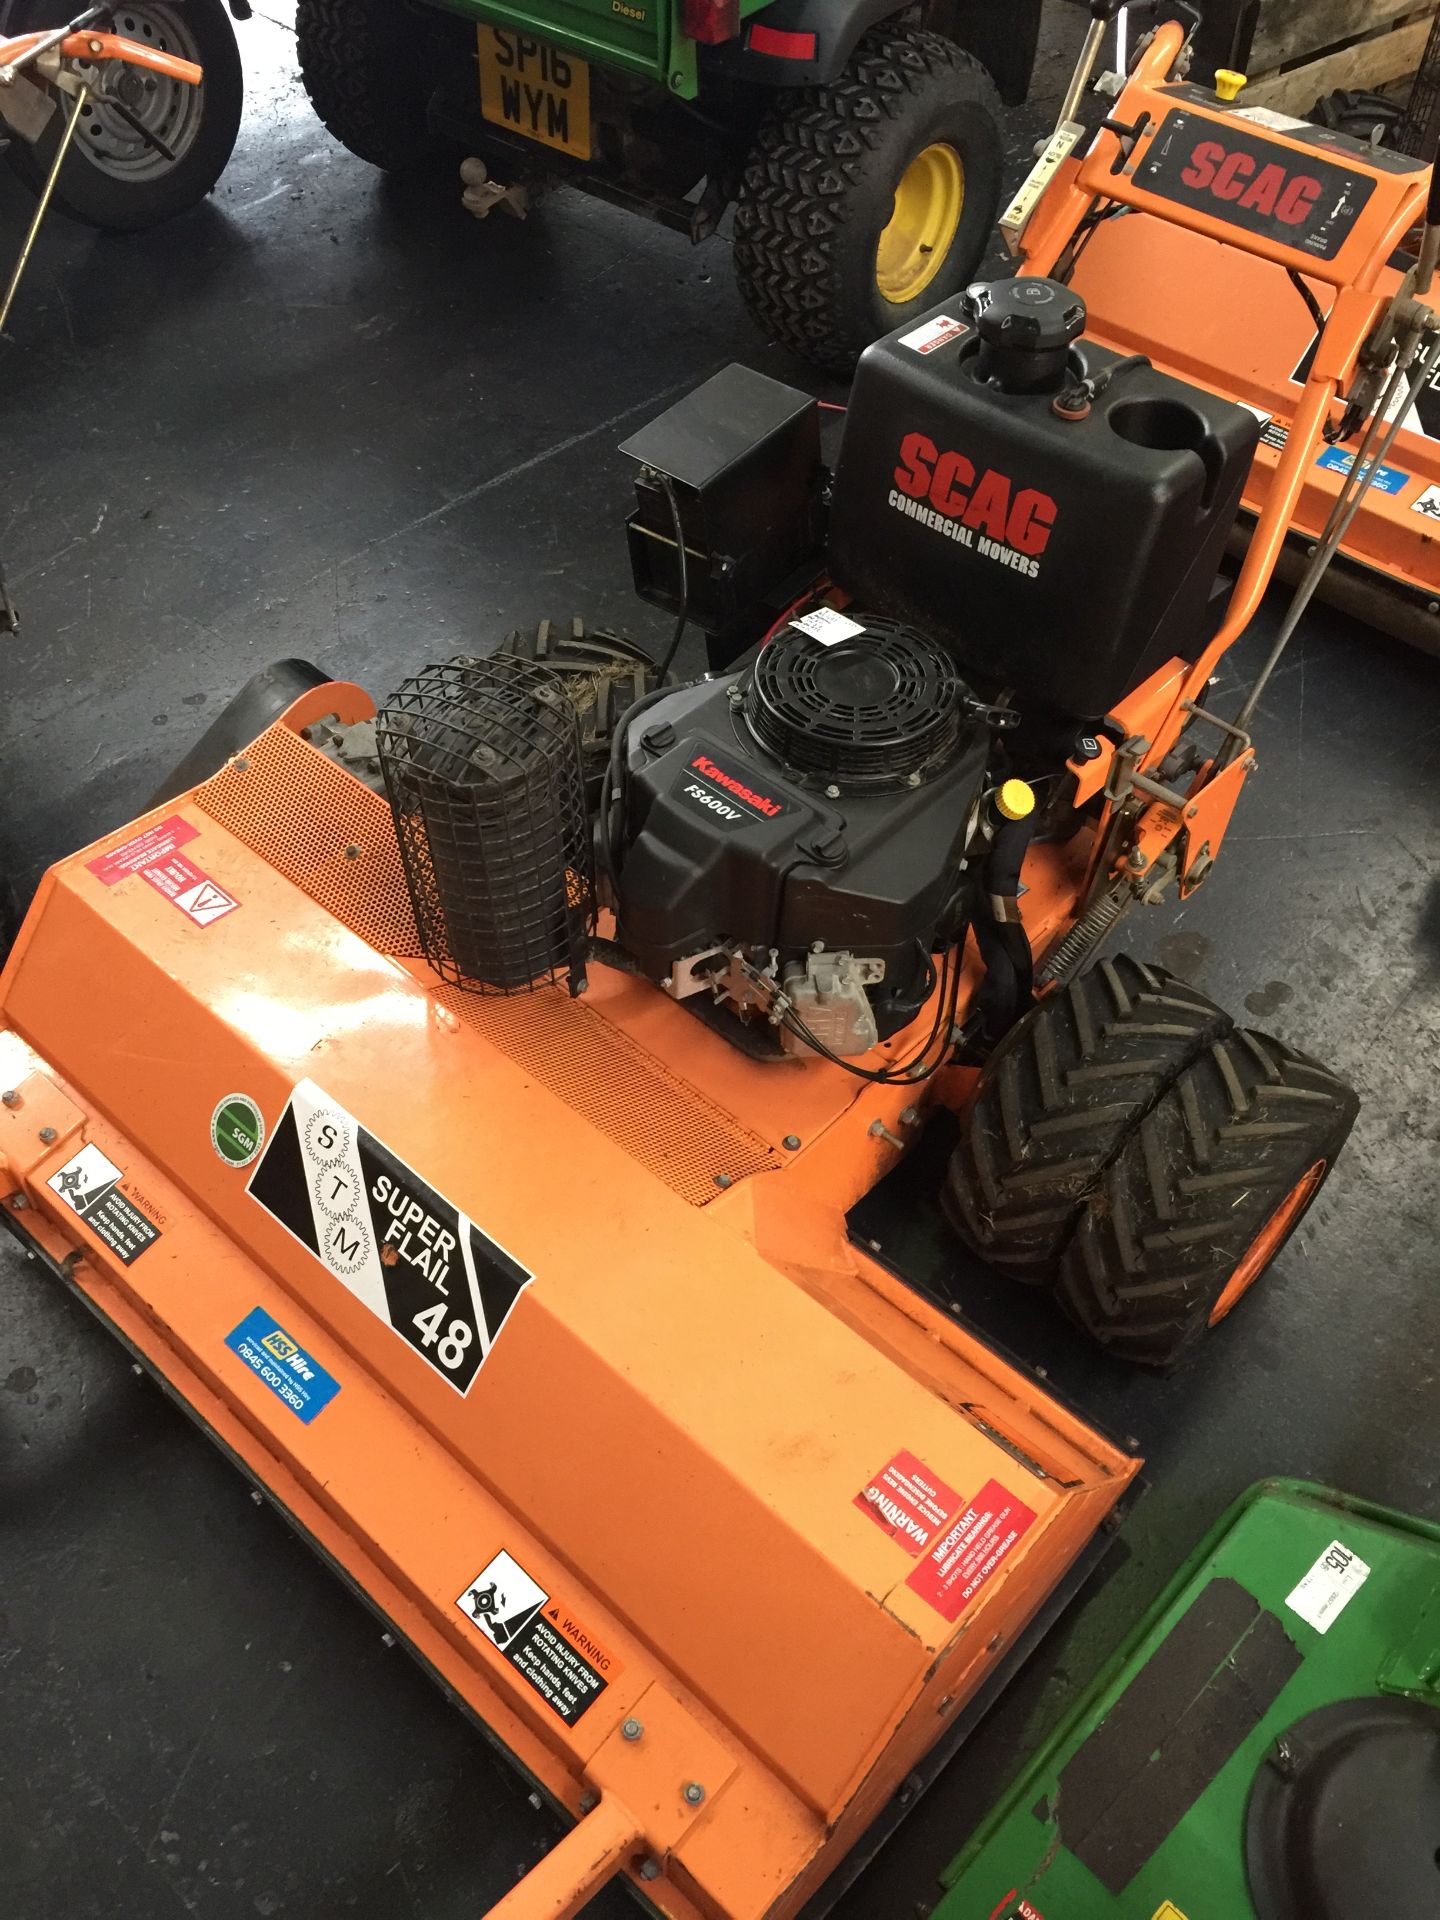 Scag Hydro-Drive SWZ36A14FS Large Pedestrian Rotary Mower with electric starter and STM F48 Super fl - Image 2 of 4